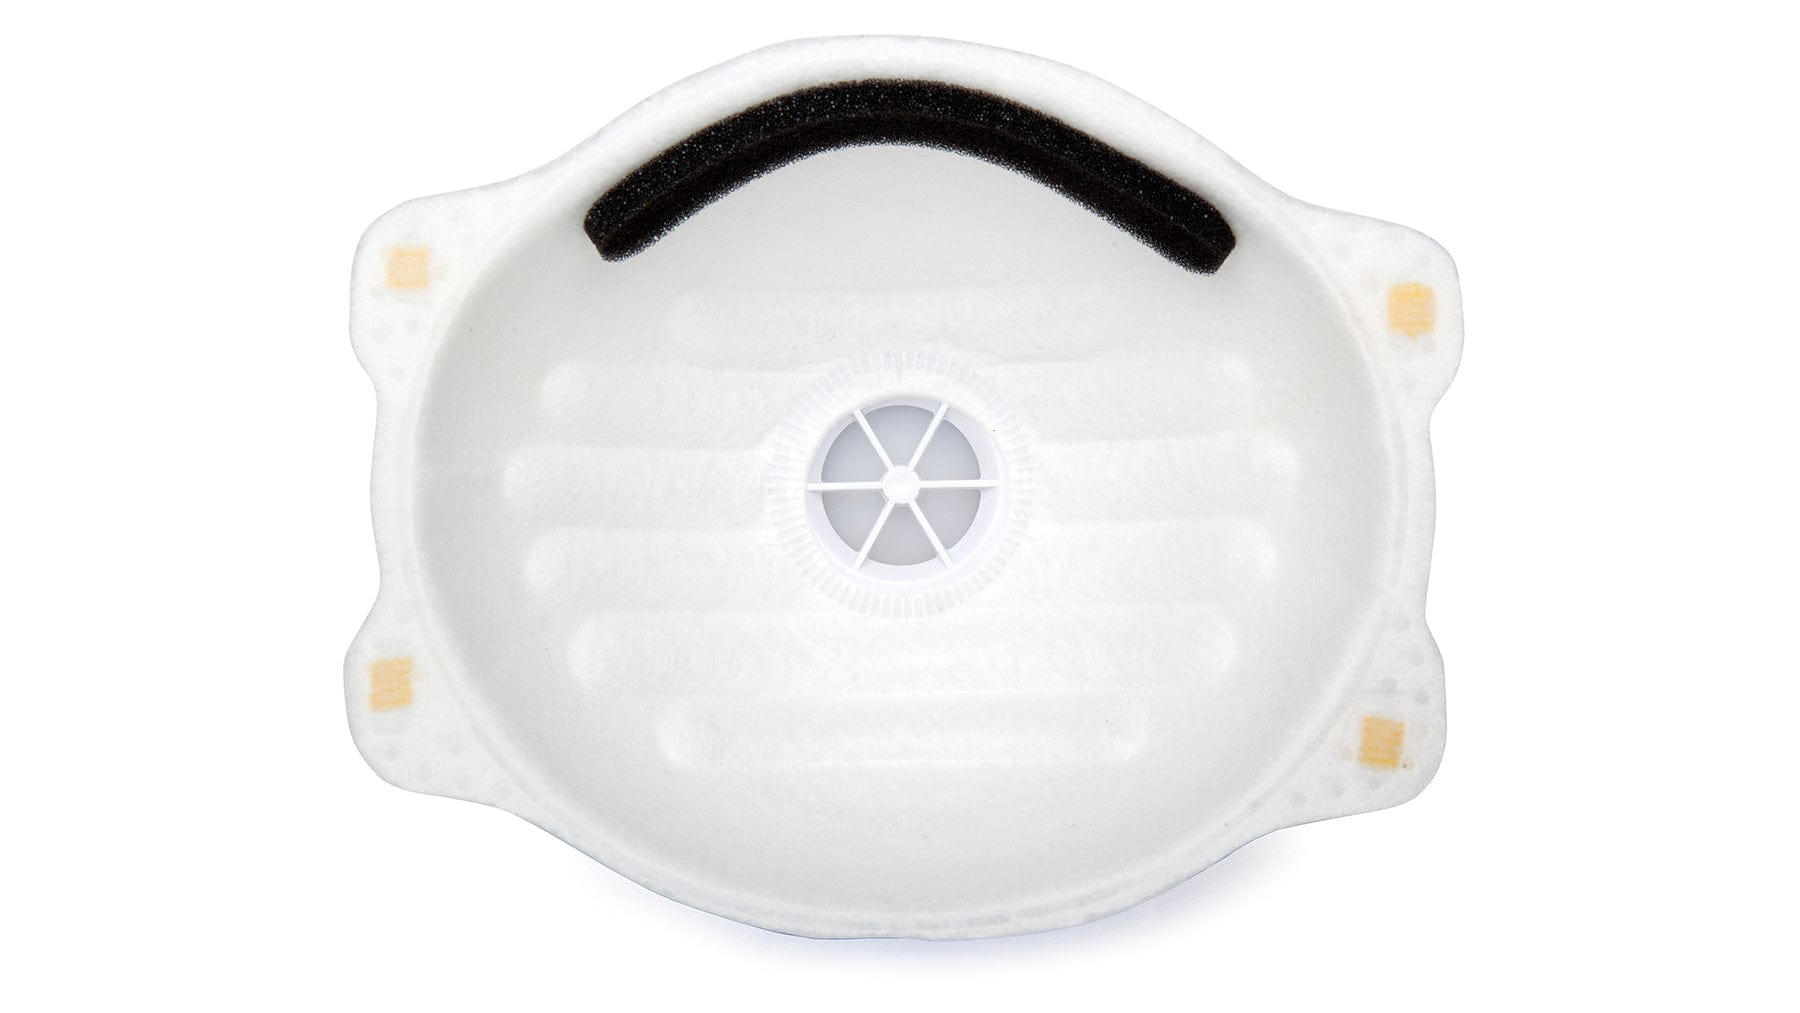 Pyramex Disposable N95 Respirator with Valve Inside View